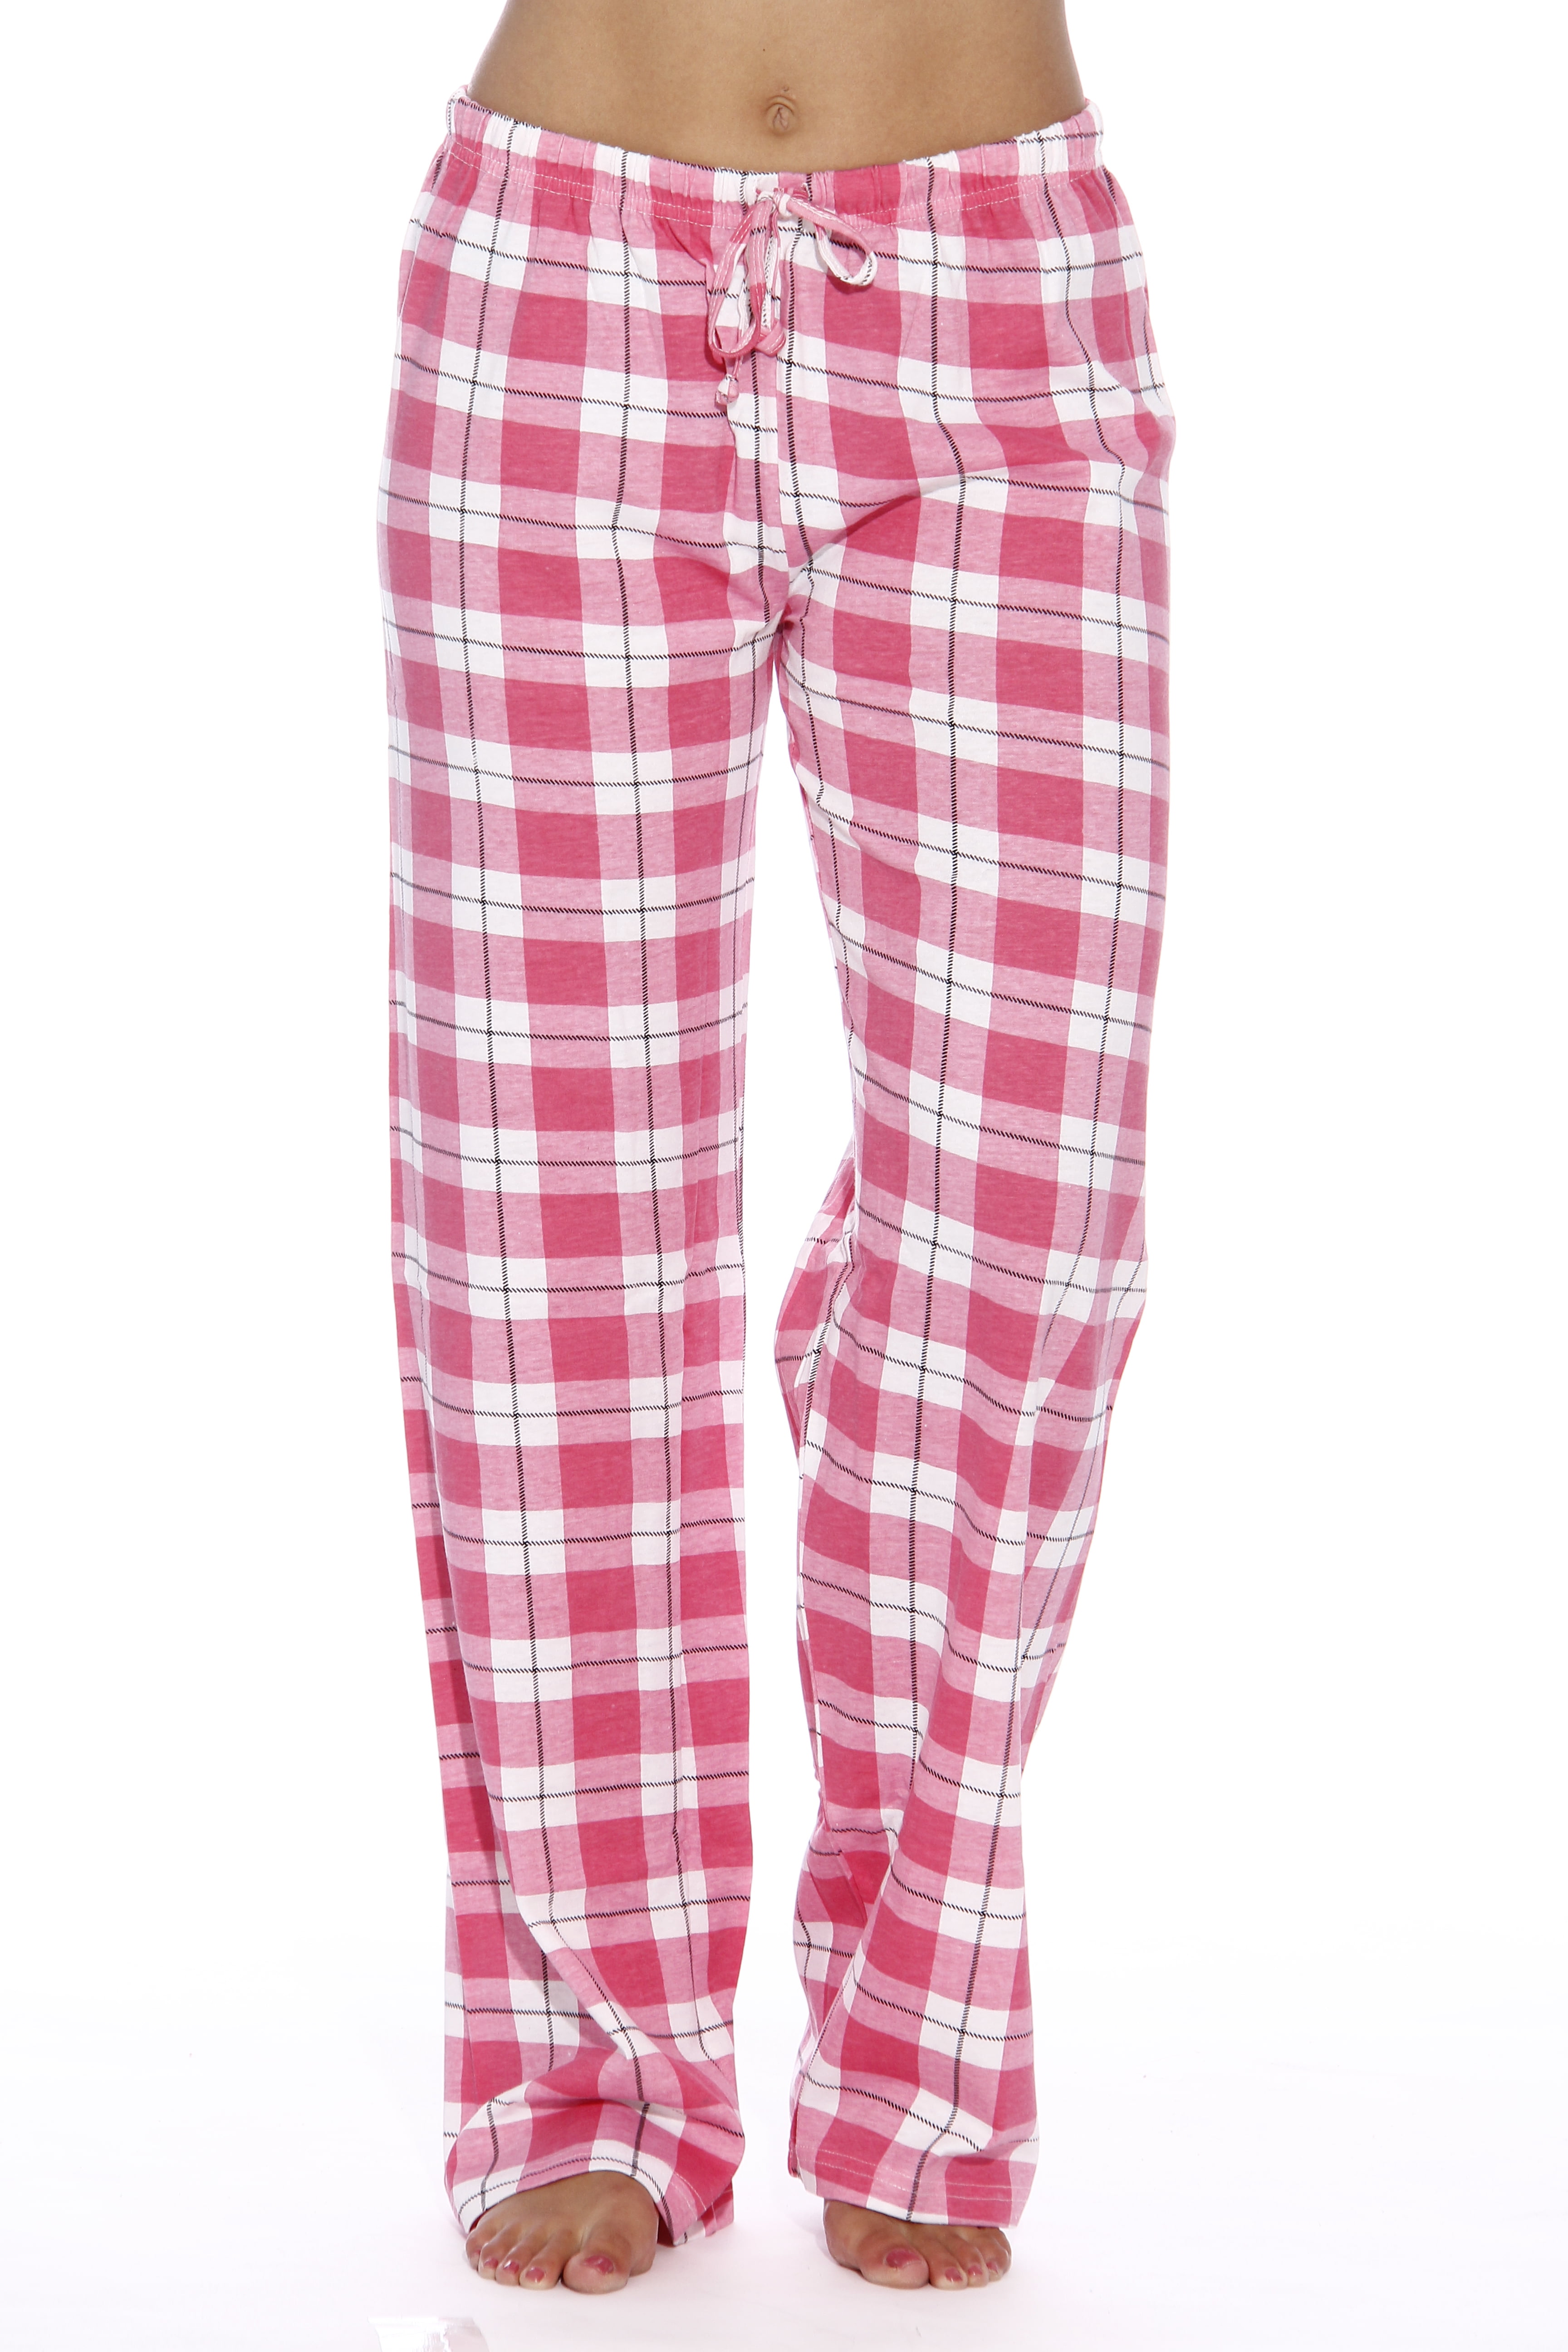 Just Love Women's Plaid Pajama Pants in 100% Cotton Jersey ...